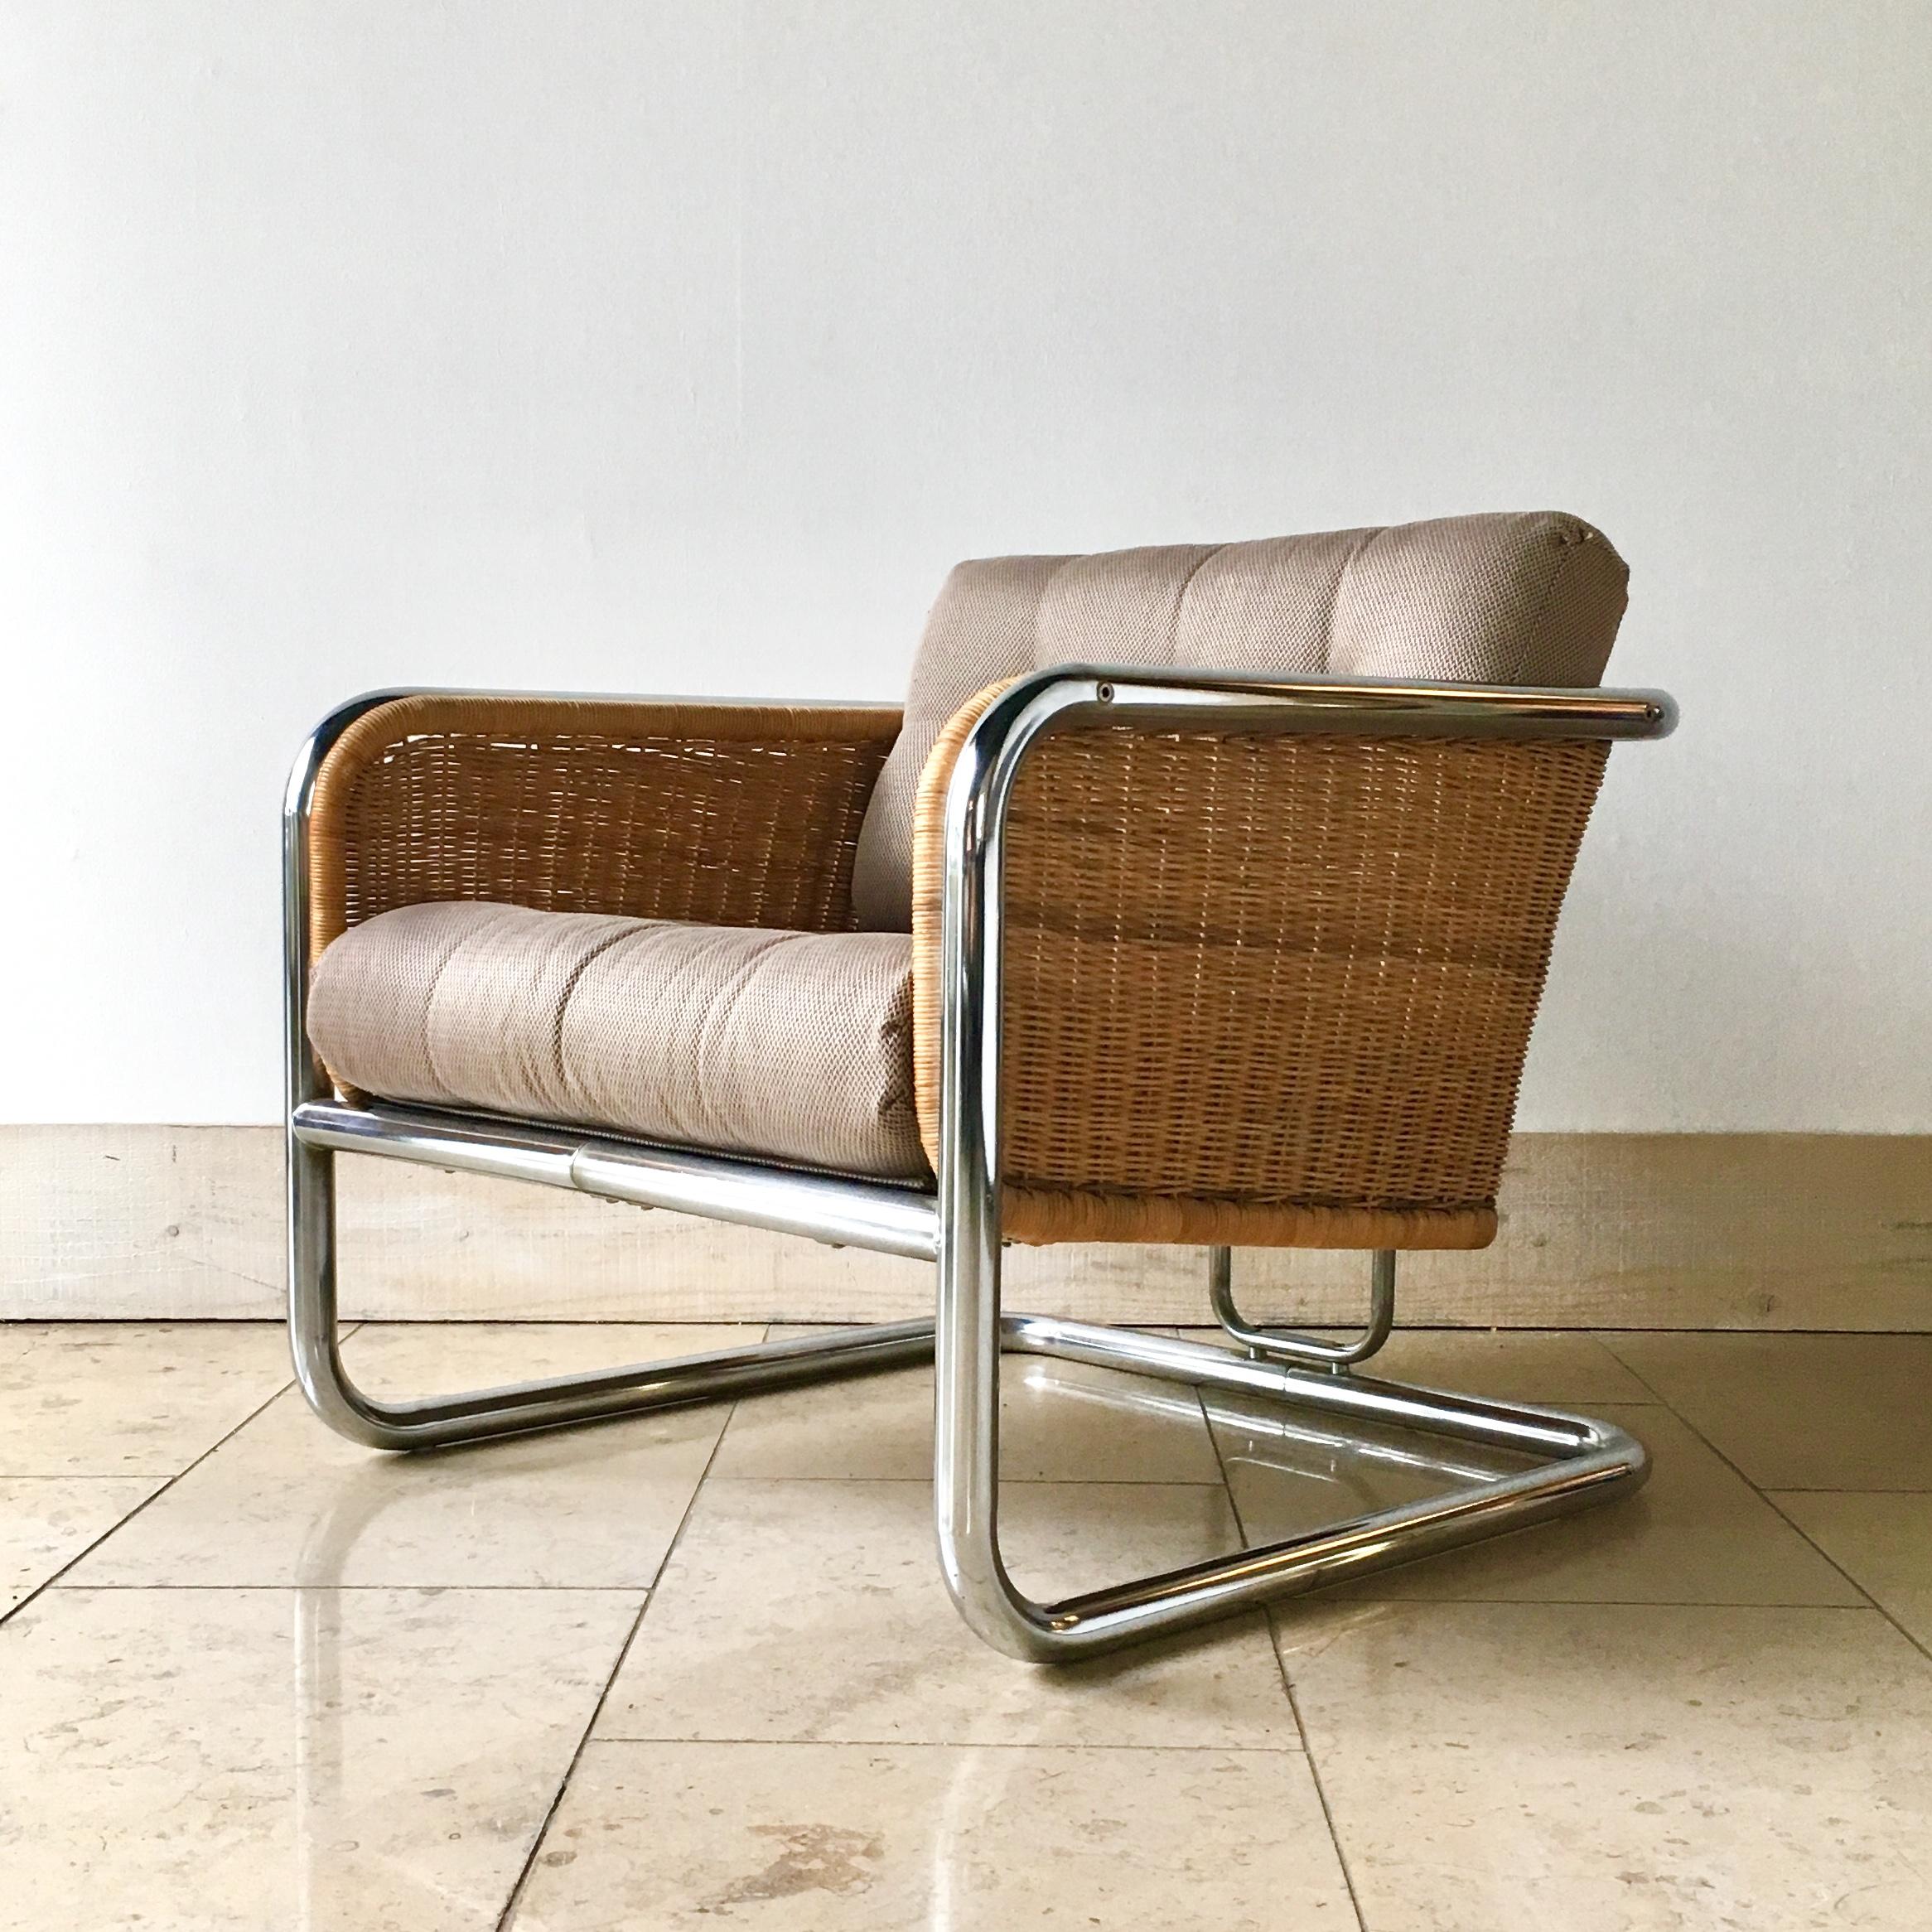 Pair of Woven Rattan and Chrome Framed Armchairs 1960s For Sale 1